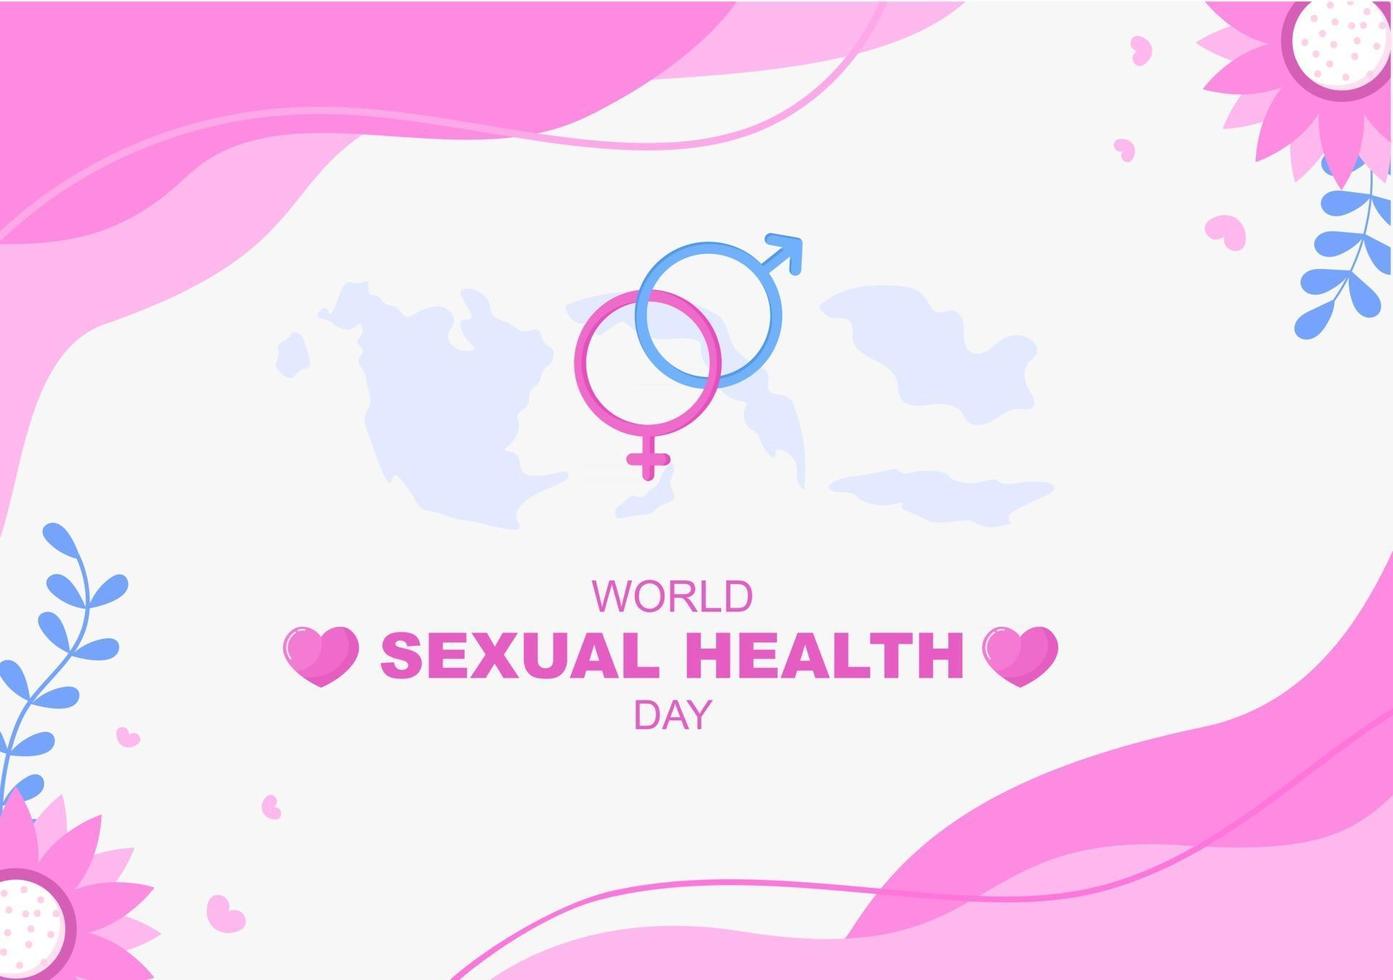 World Sexual Day Background Illustration vector